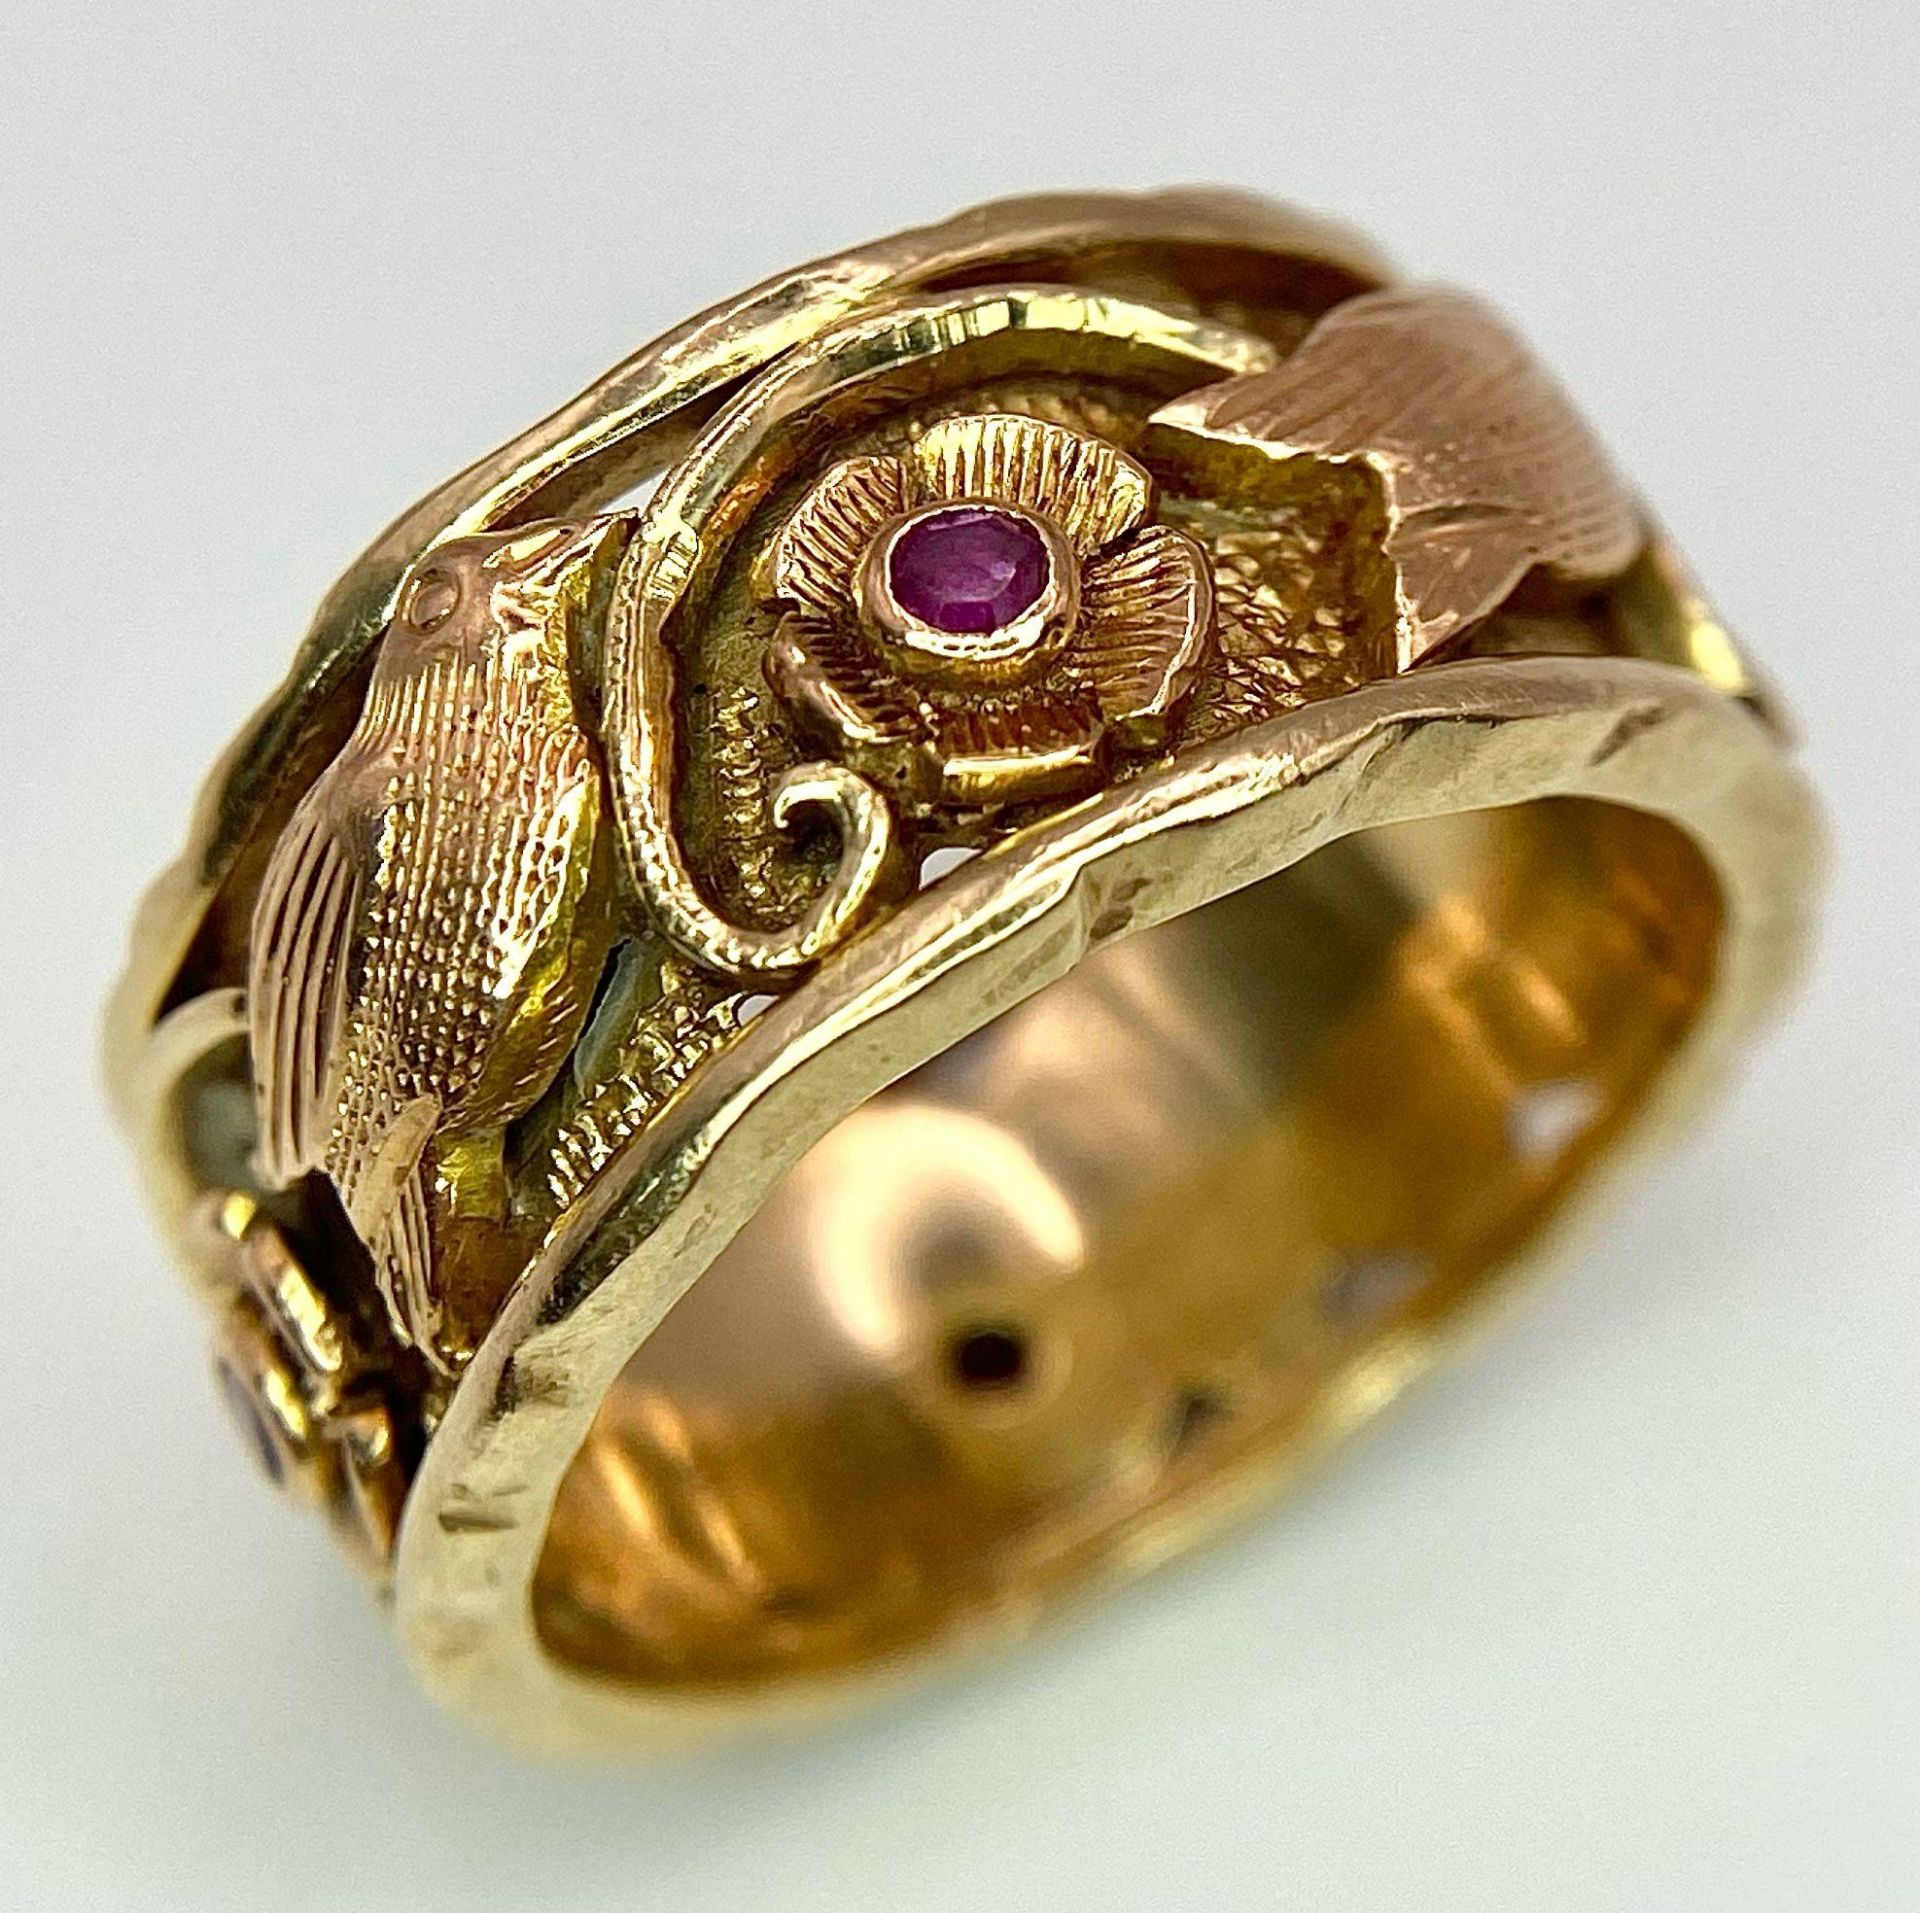 A Beautifully Decorated Bird and Floral 14K Rose Gold and Ruby Band Ring. Size N. 7.5g total weight. - Image 3 of 6